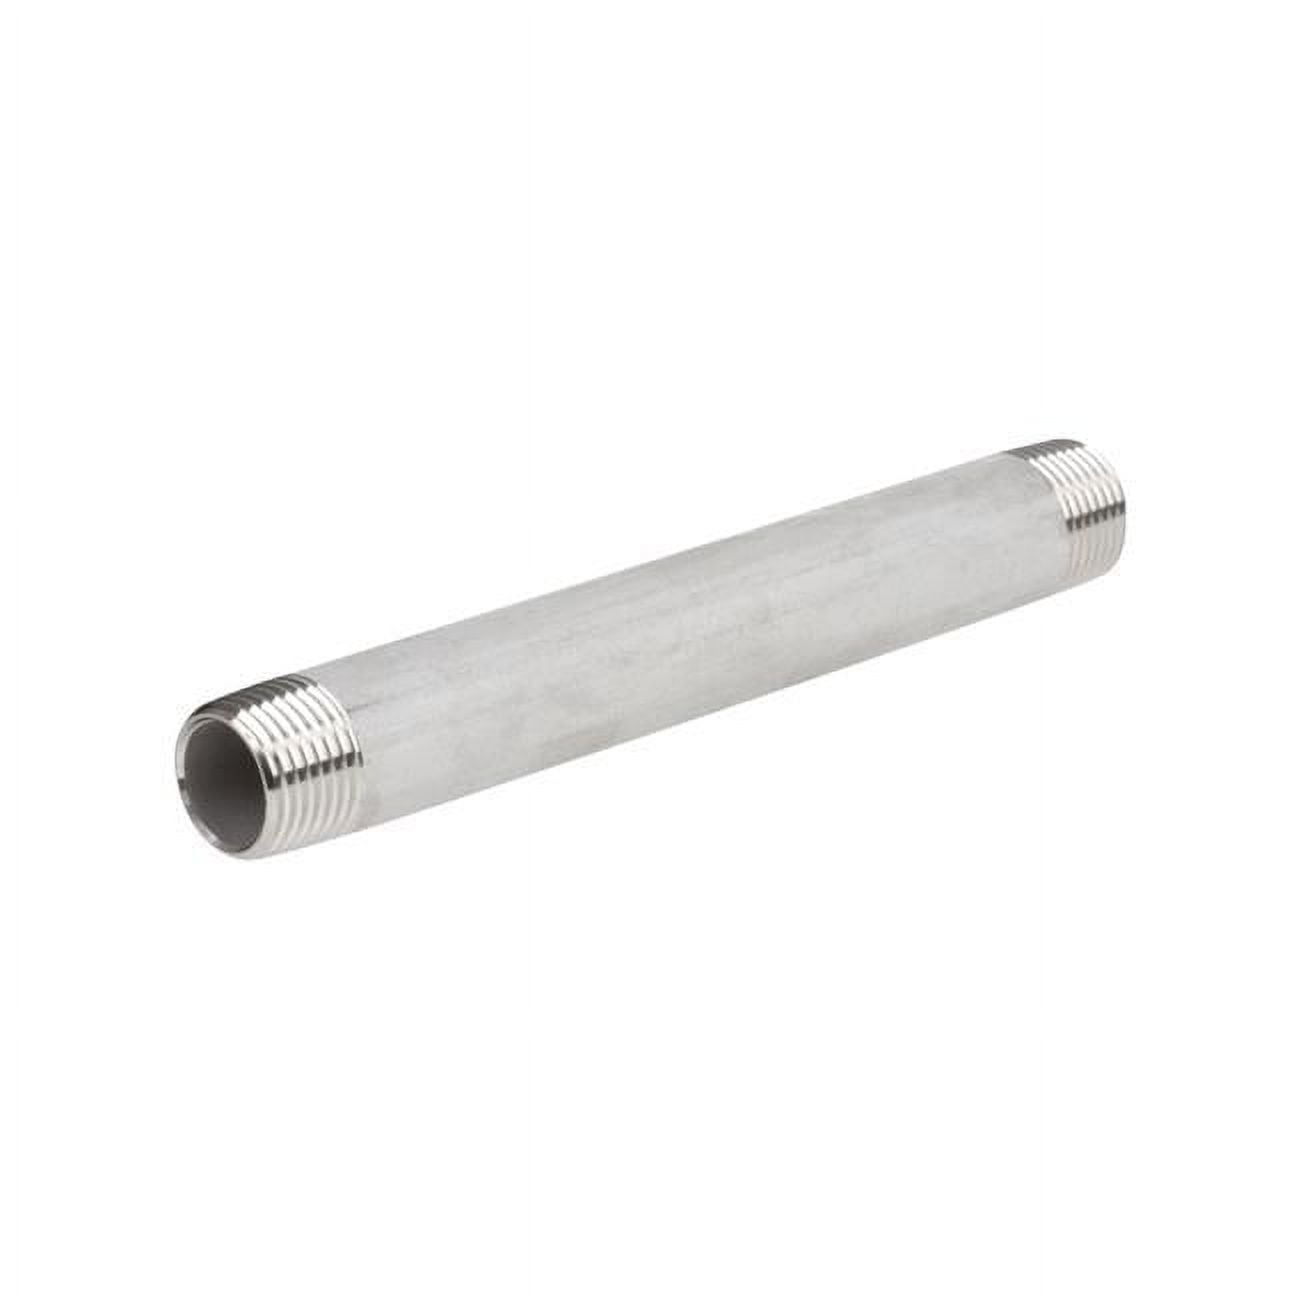 4809893 Stainless Steel Pipe Nipple - 1.25 In. 1.25 Dia. X 4 In.